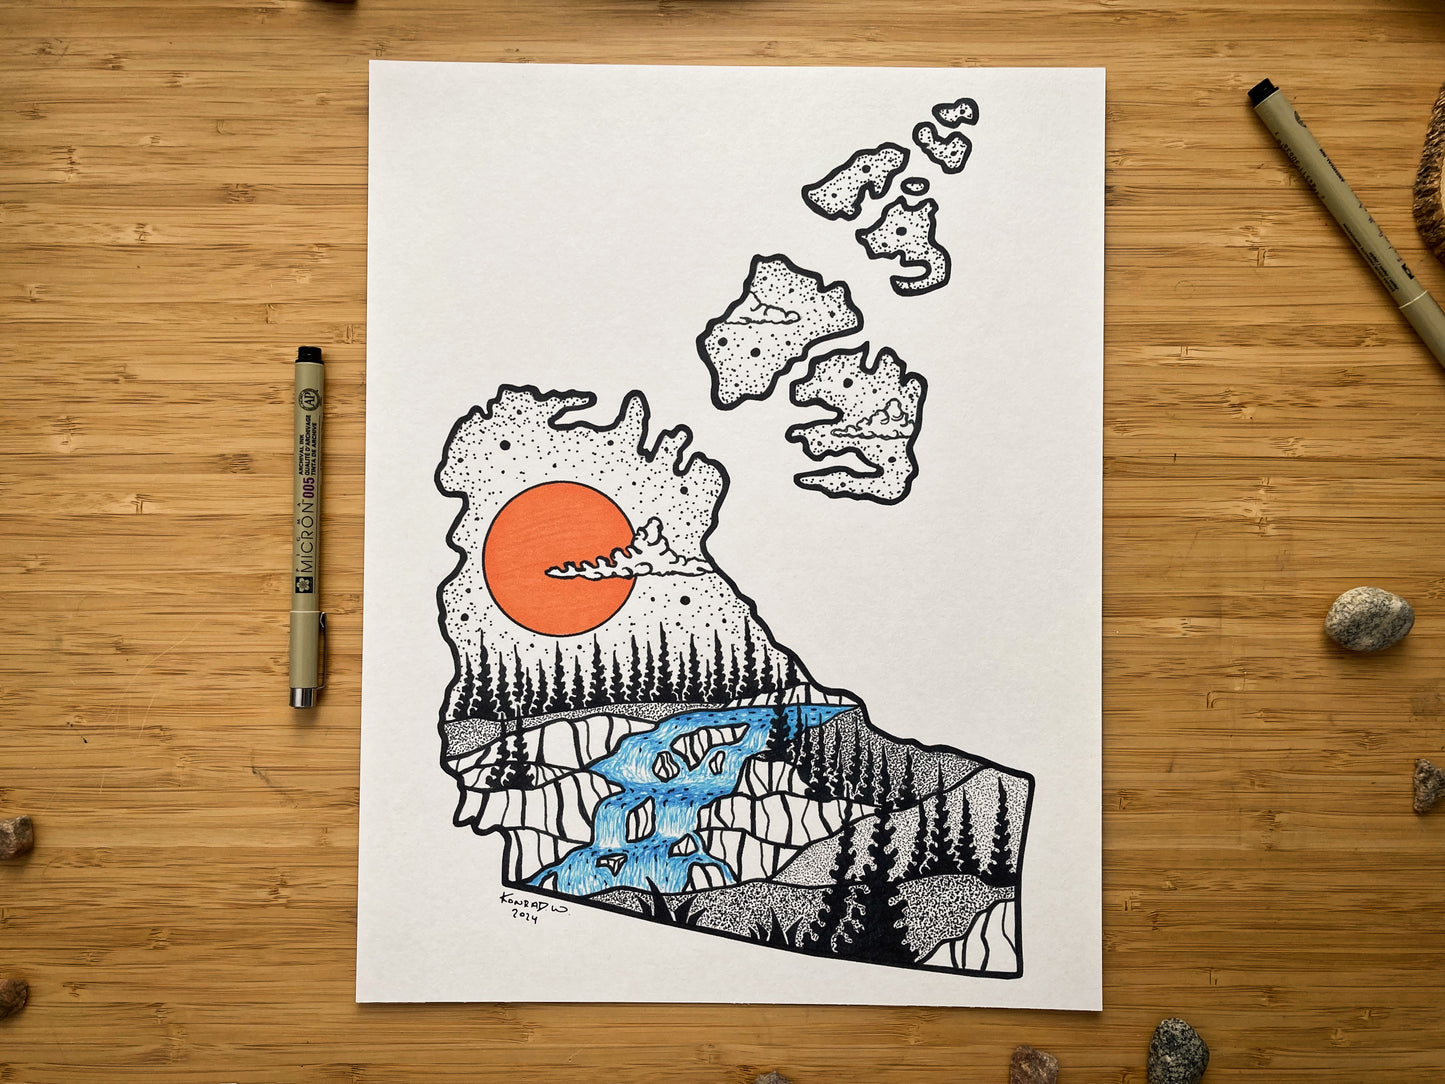 The Northwest Territories (NWT) - Pen and Ink PRINT